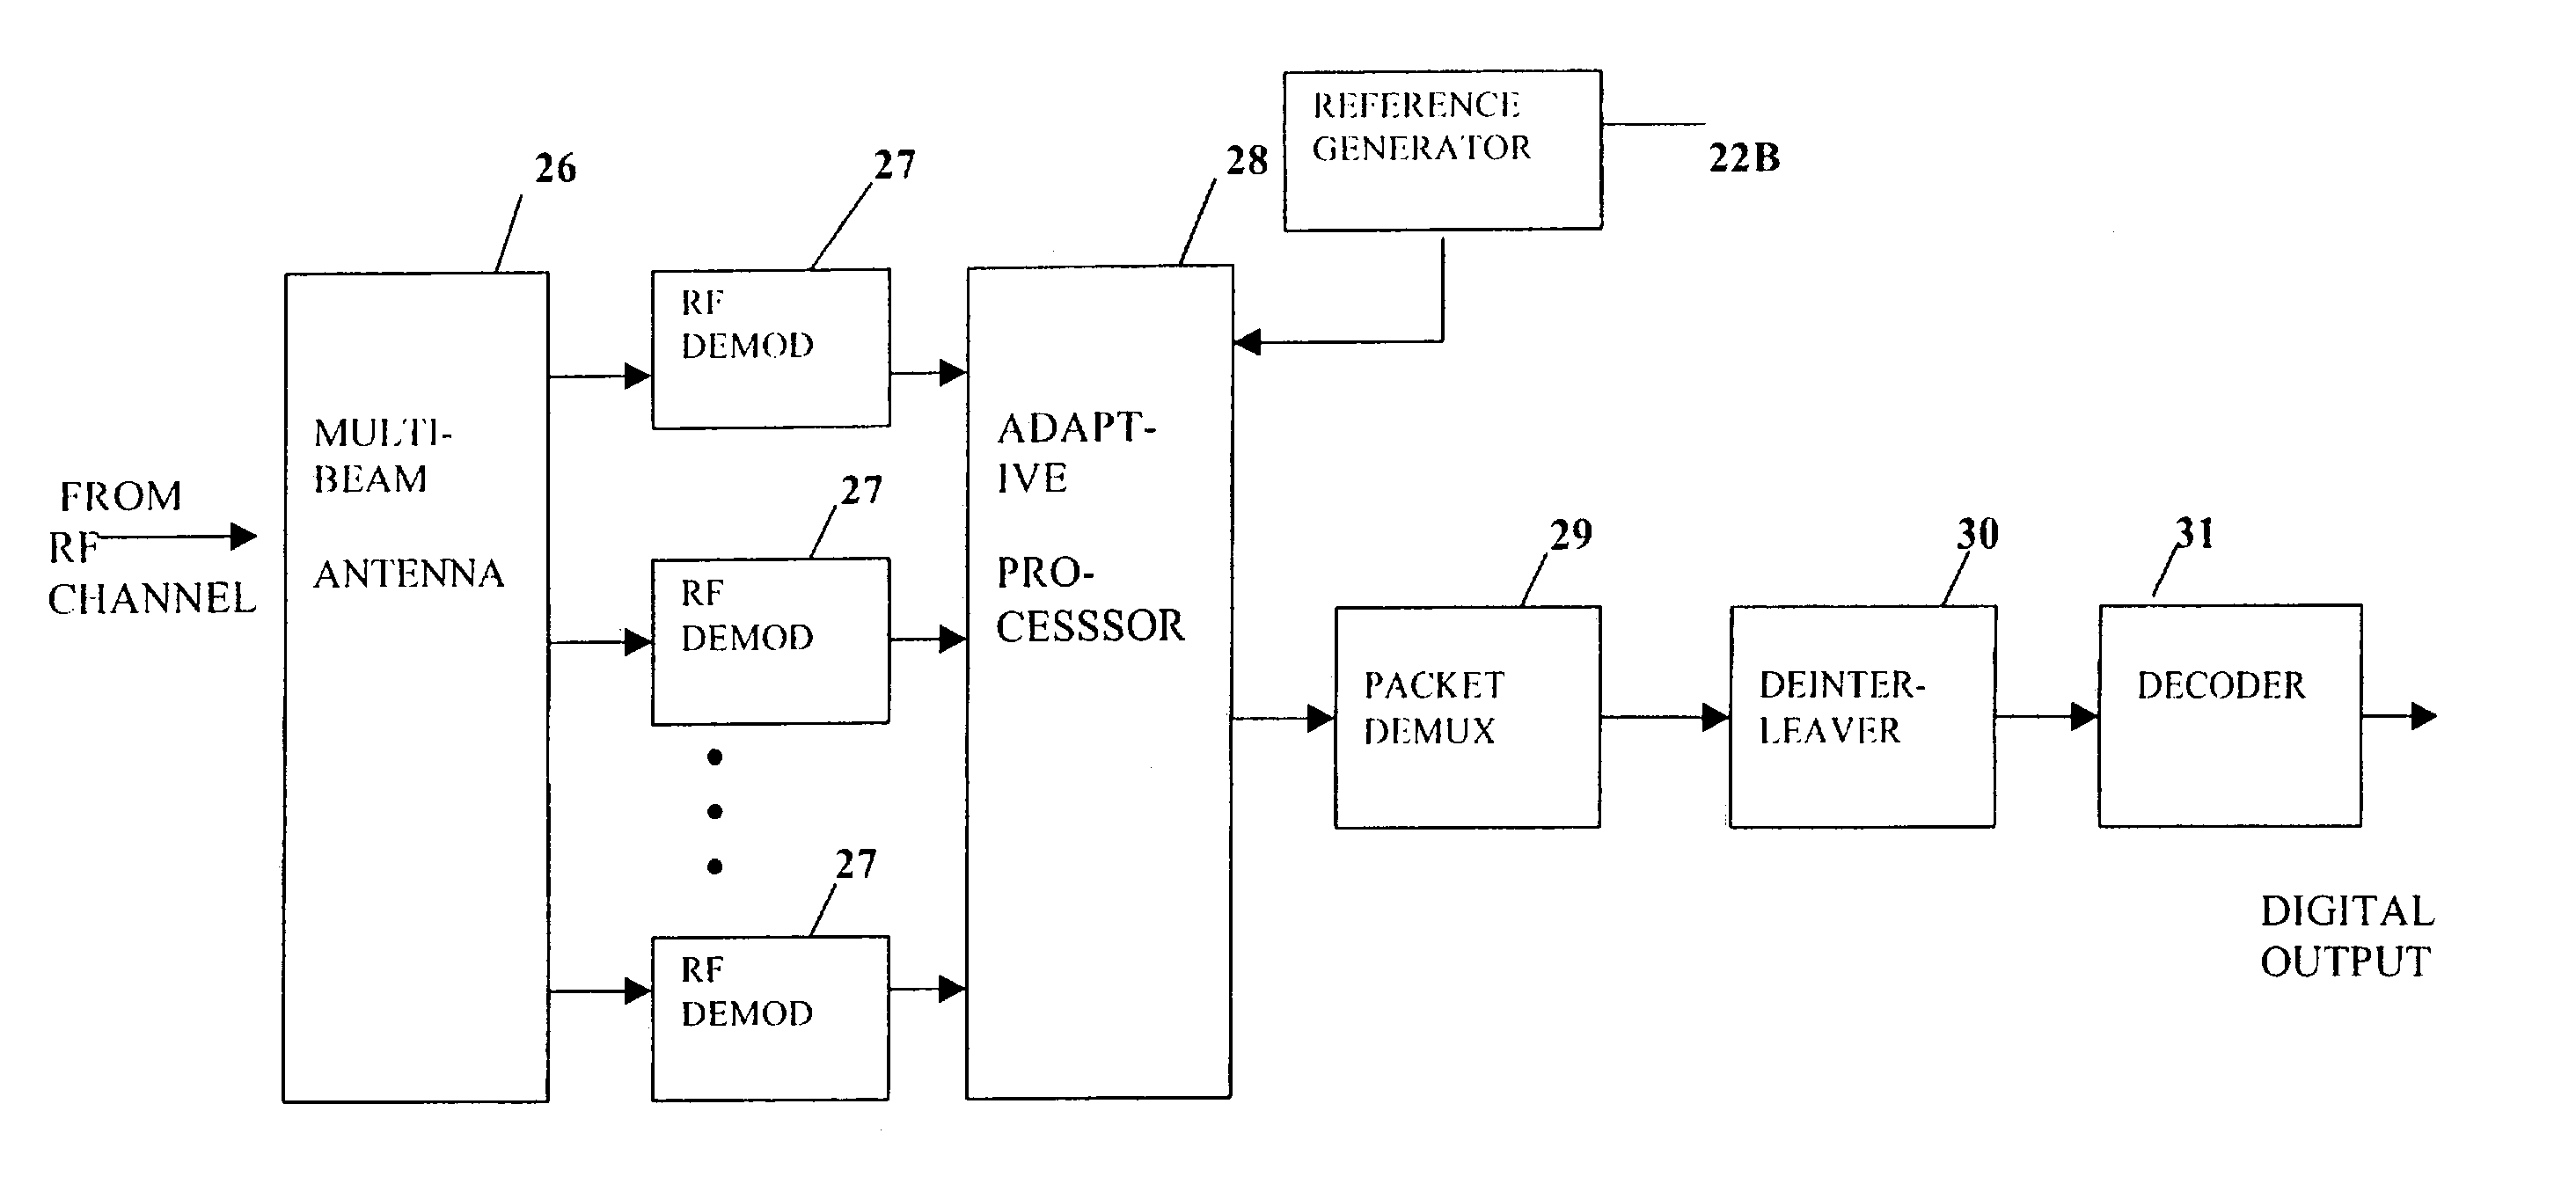 Multiple access system and method for multibeam digital radio systems